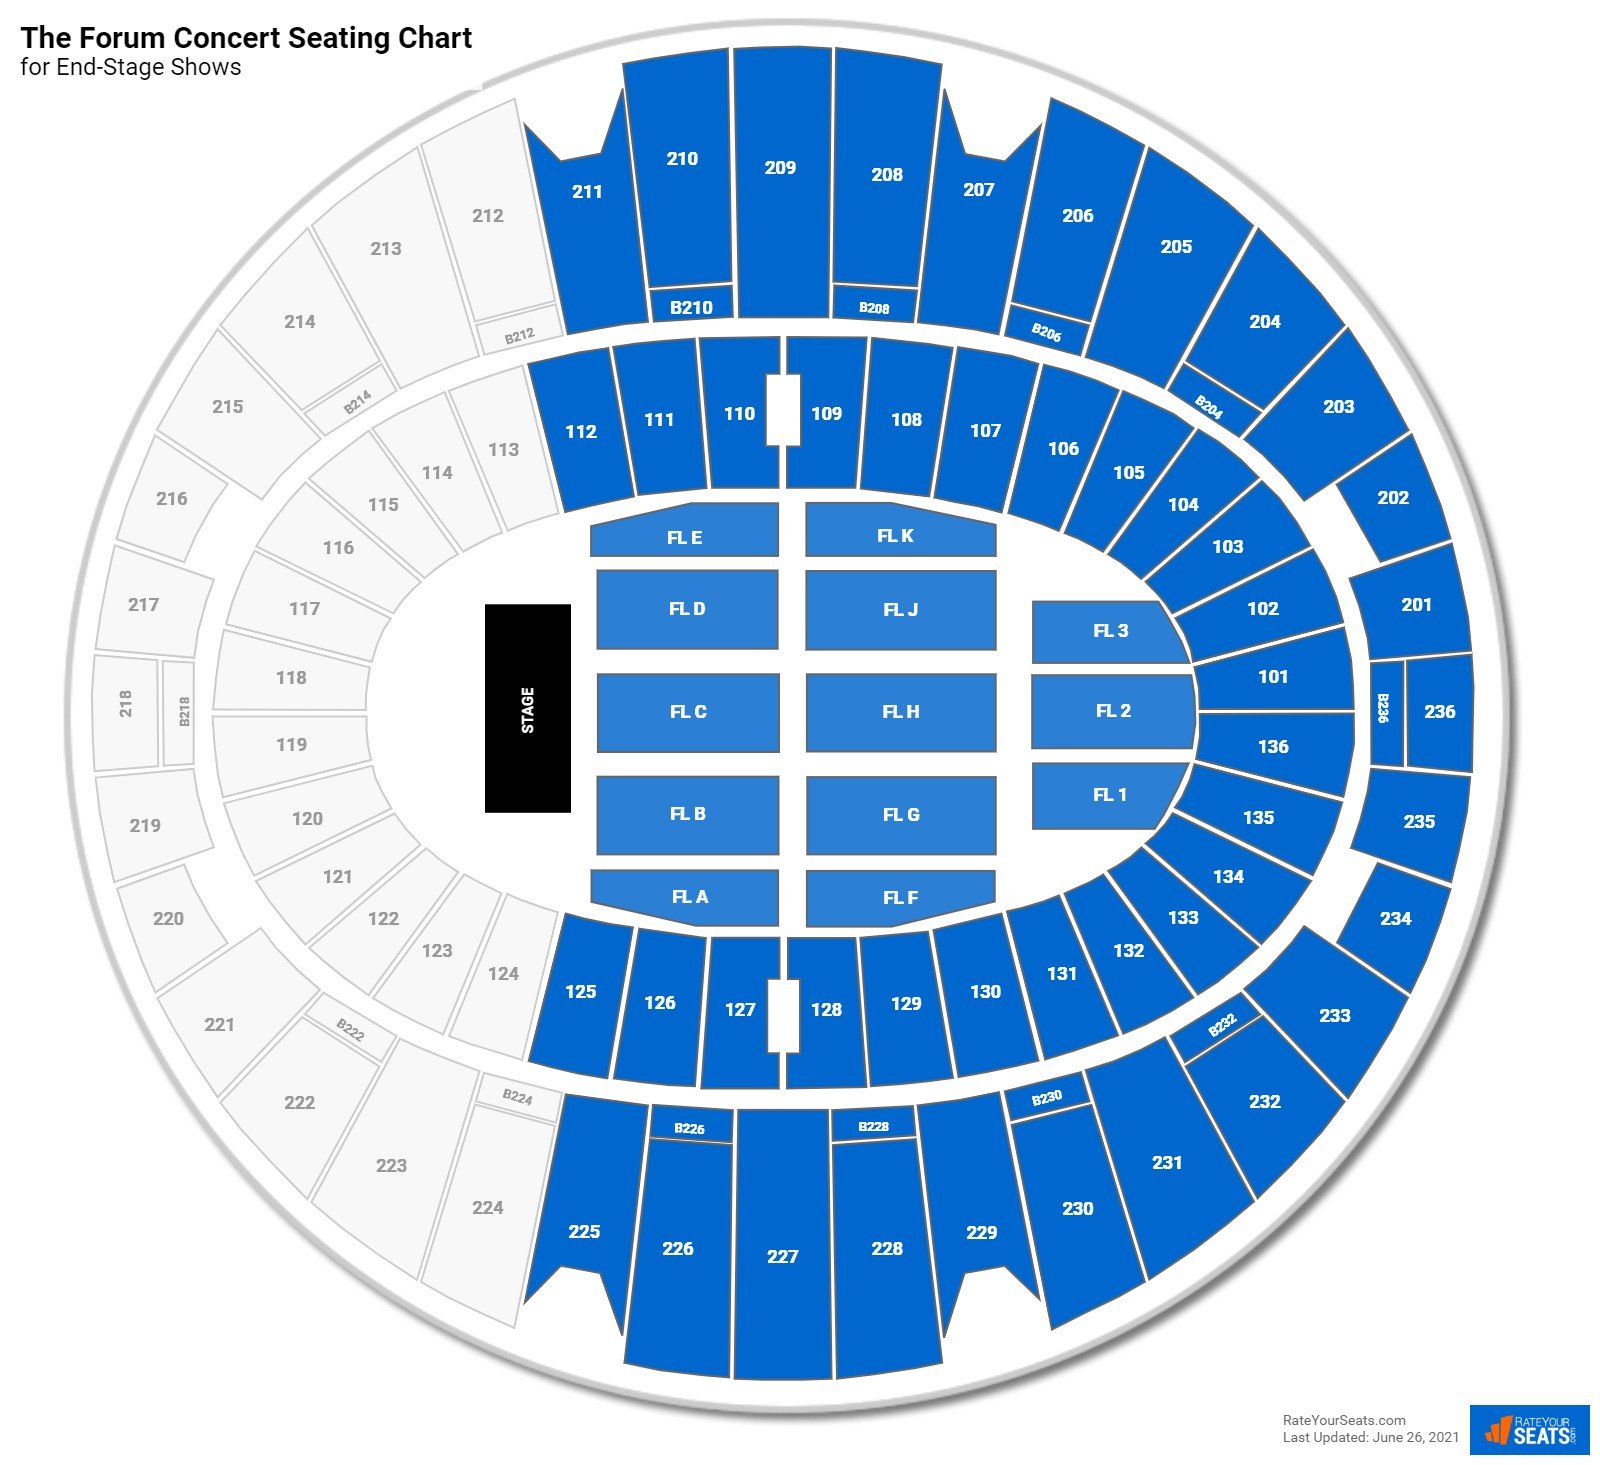 The Forum Concert Seating Chart